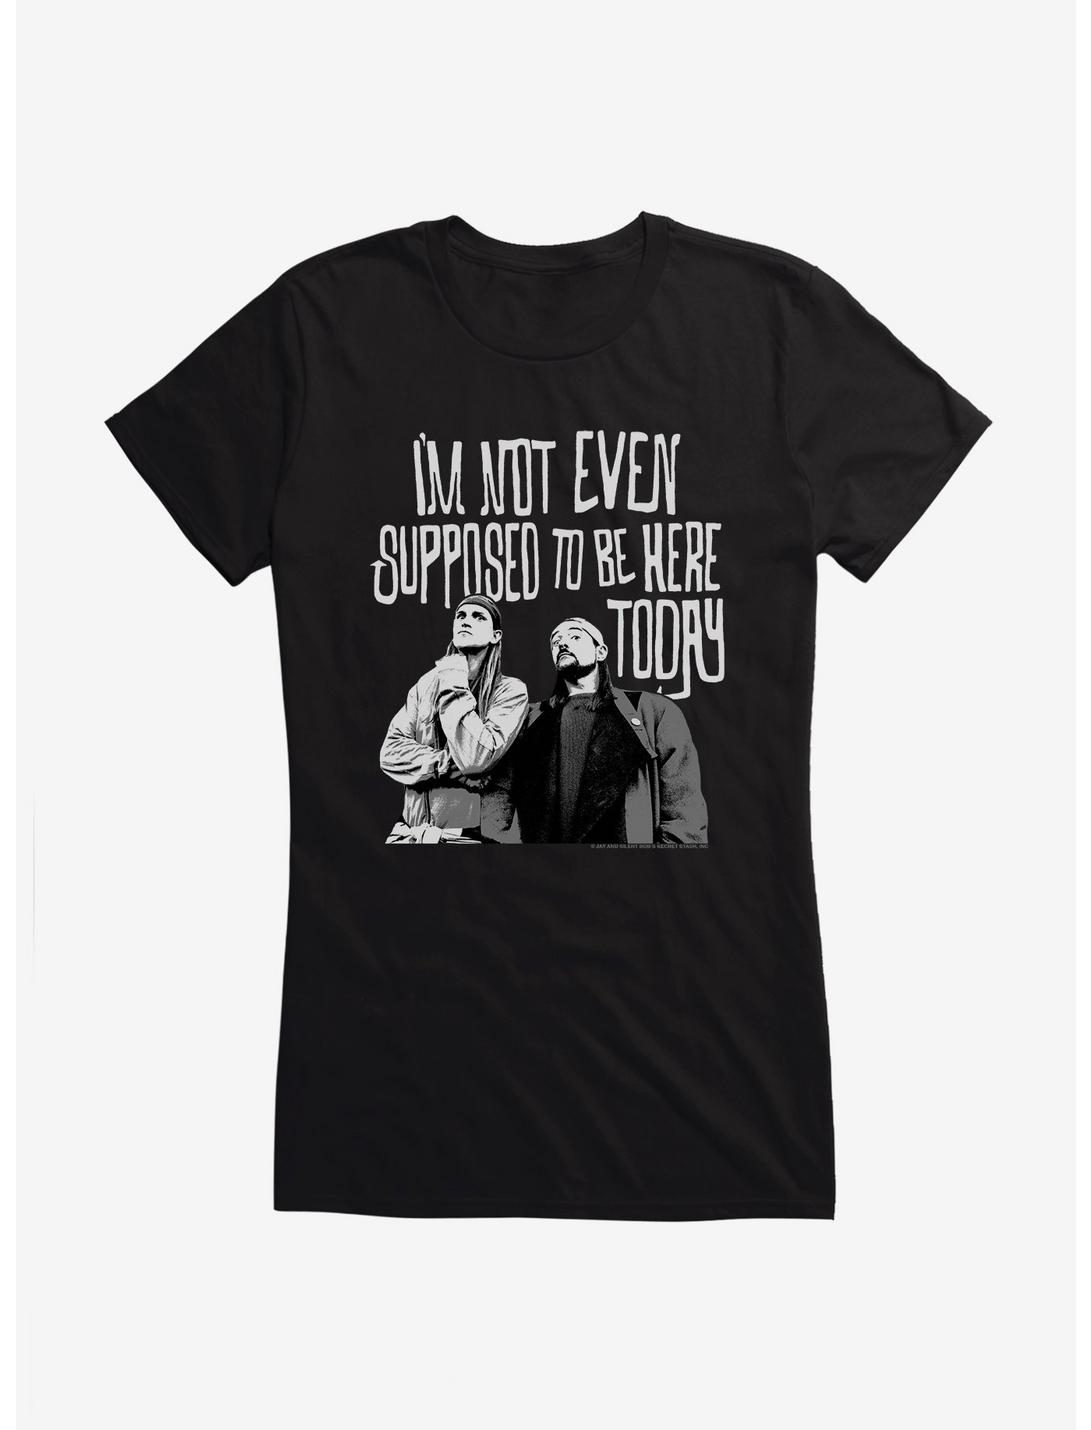 Jay And Silent Bob Not Supposed To Be Here Girls T-Shirt, BLACK, hi-res